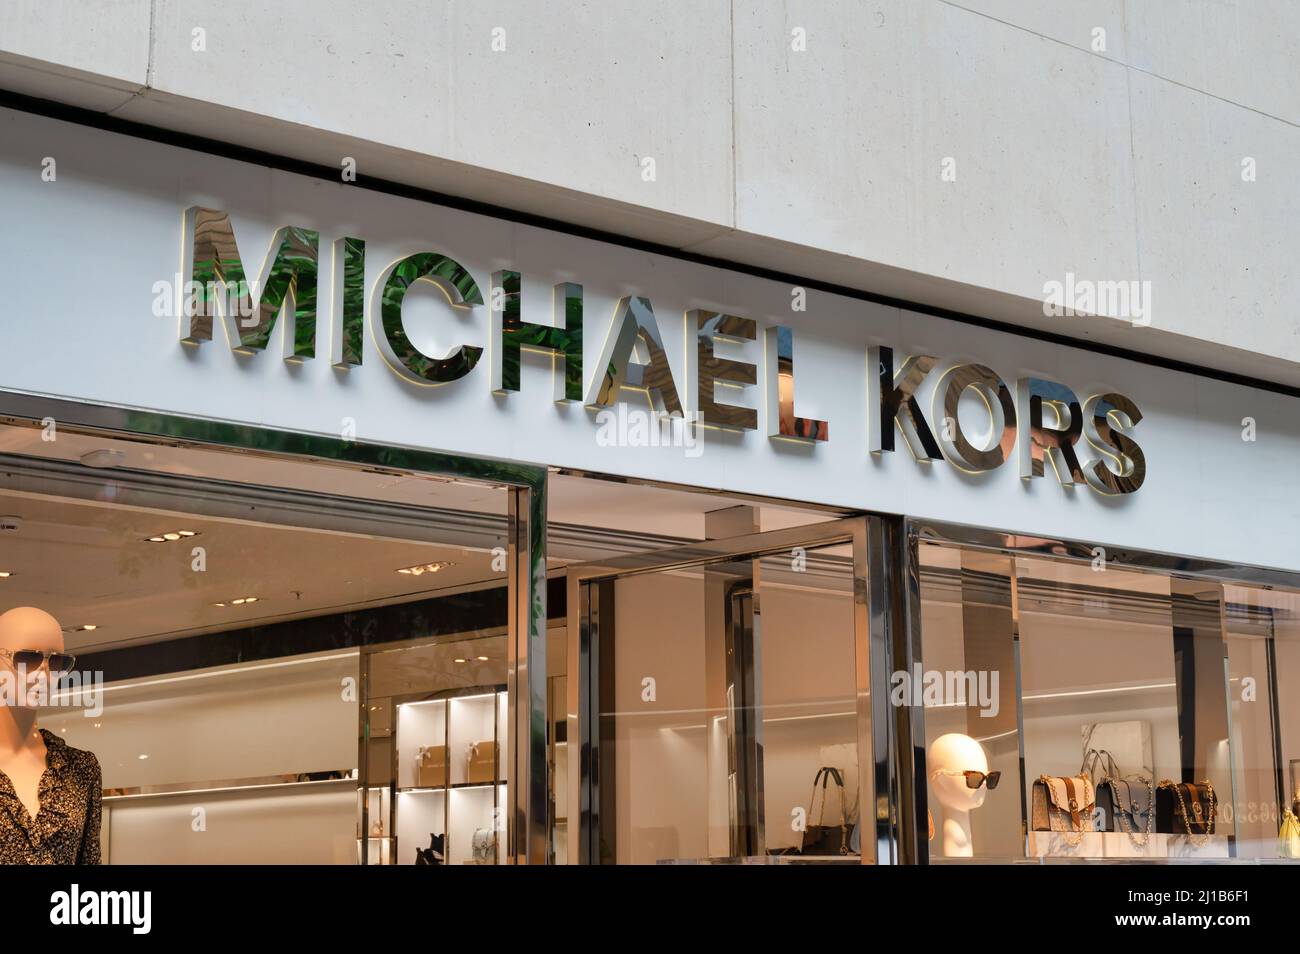 Michael kors bags stock photography and images - Alamy